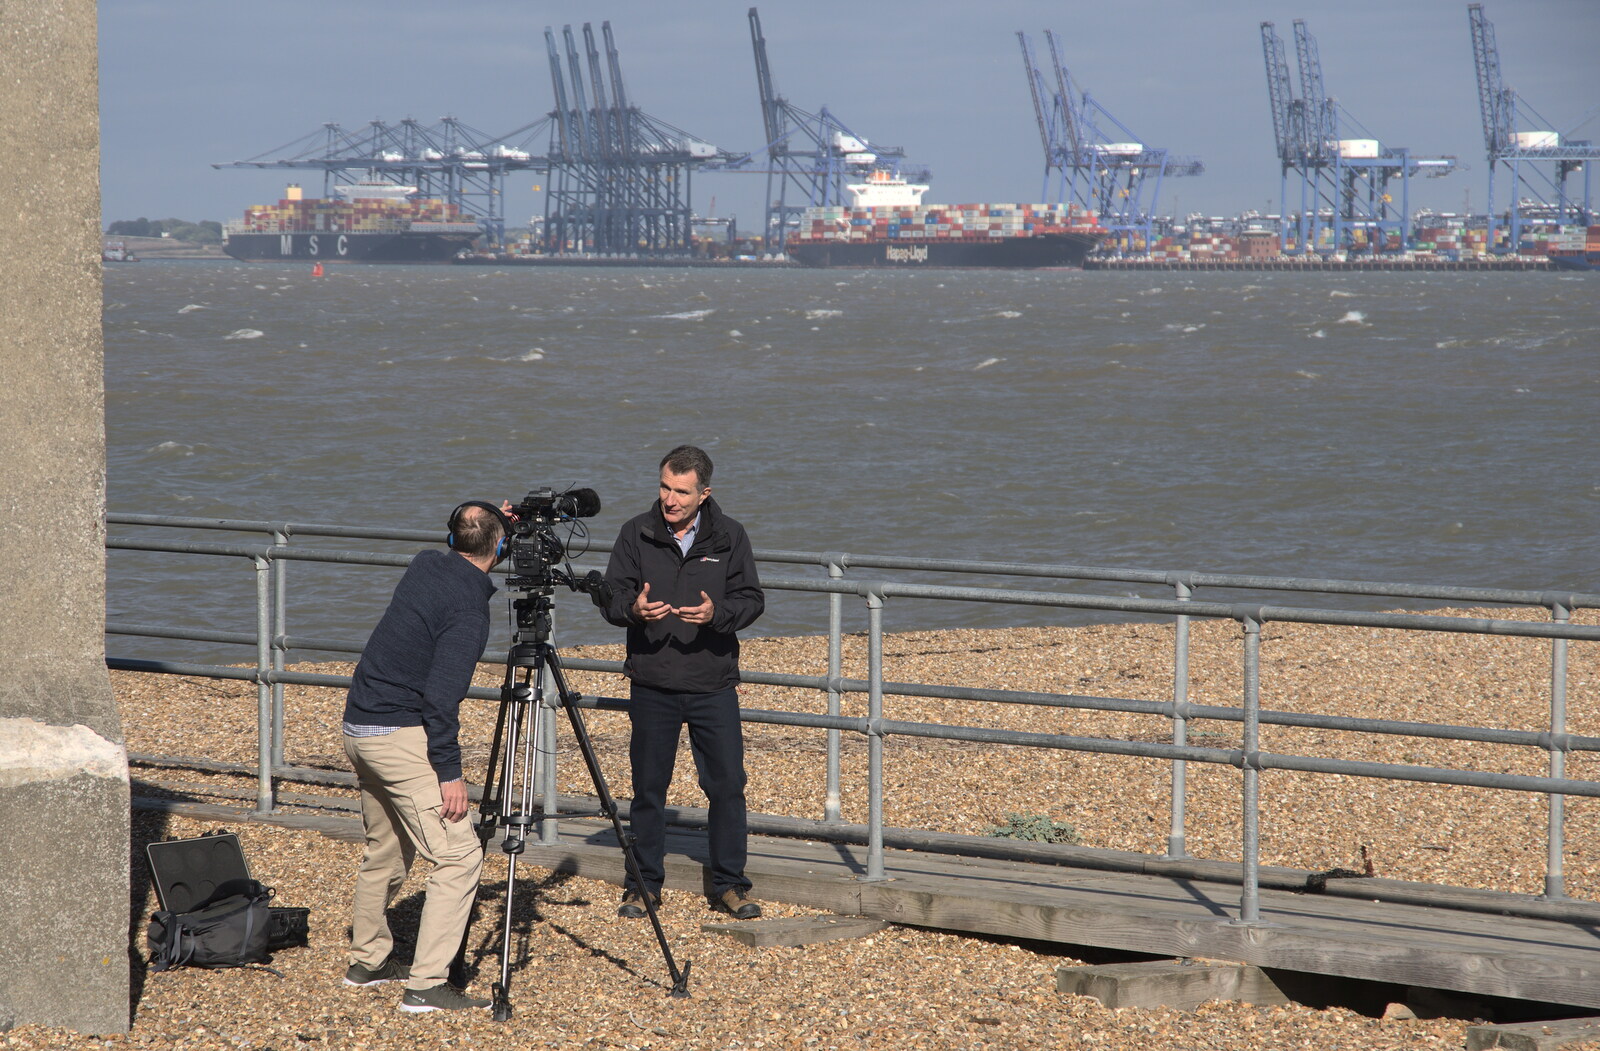 A Postcard from Felixstowe, Suffolk - 5th October 2022: Some kind of TV interview is filmed 